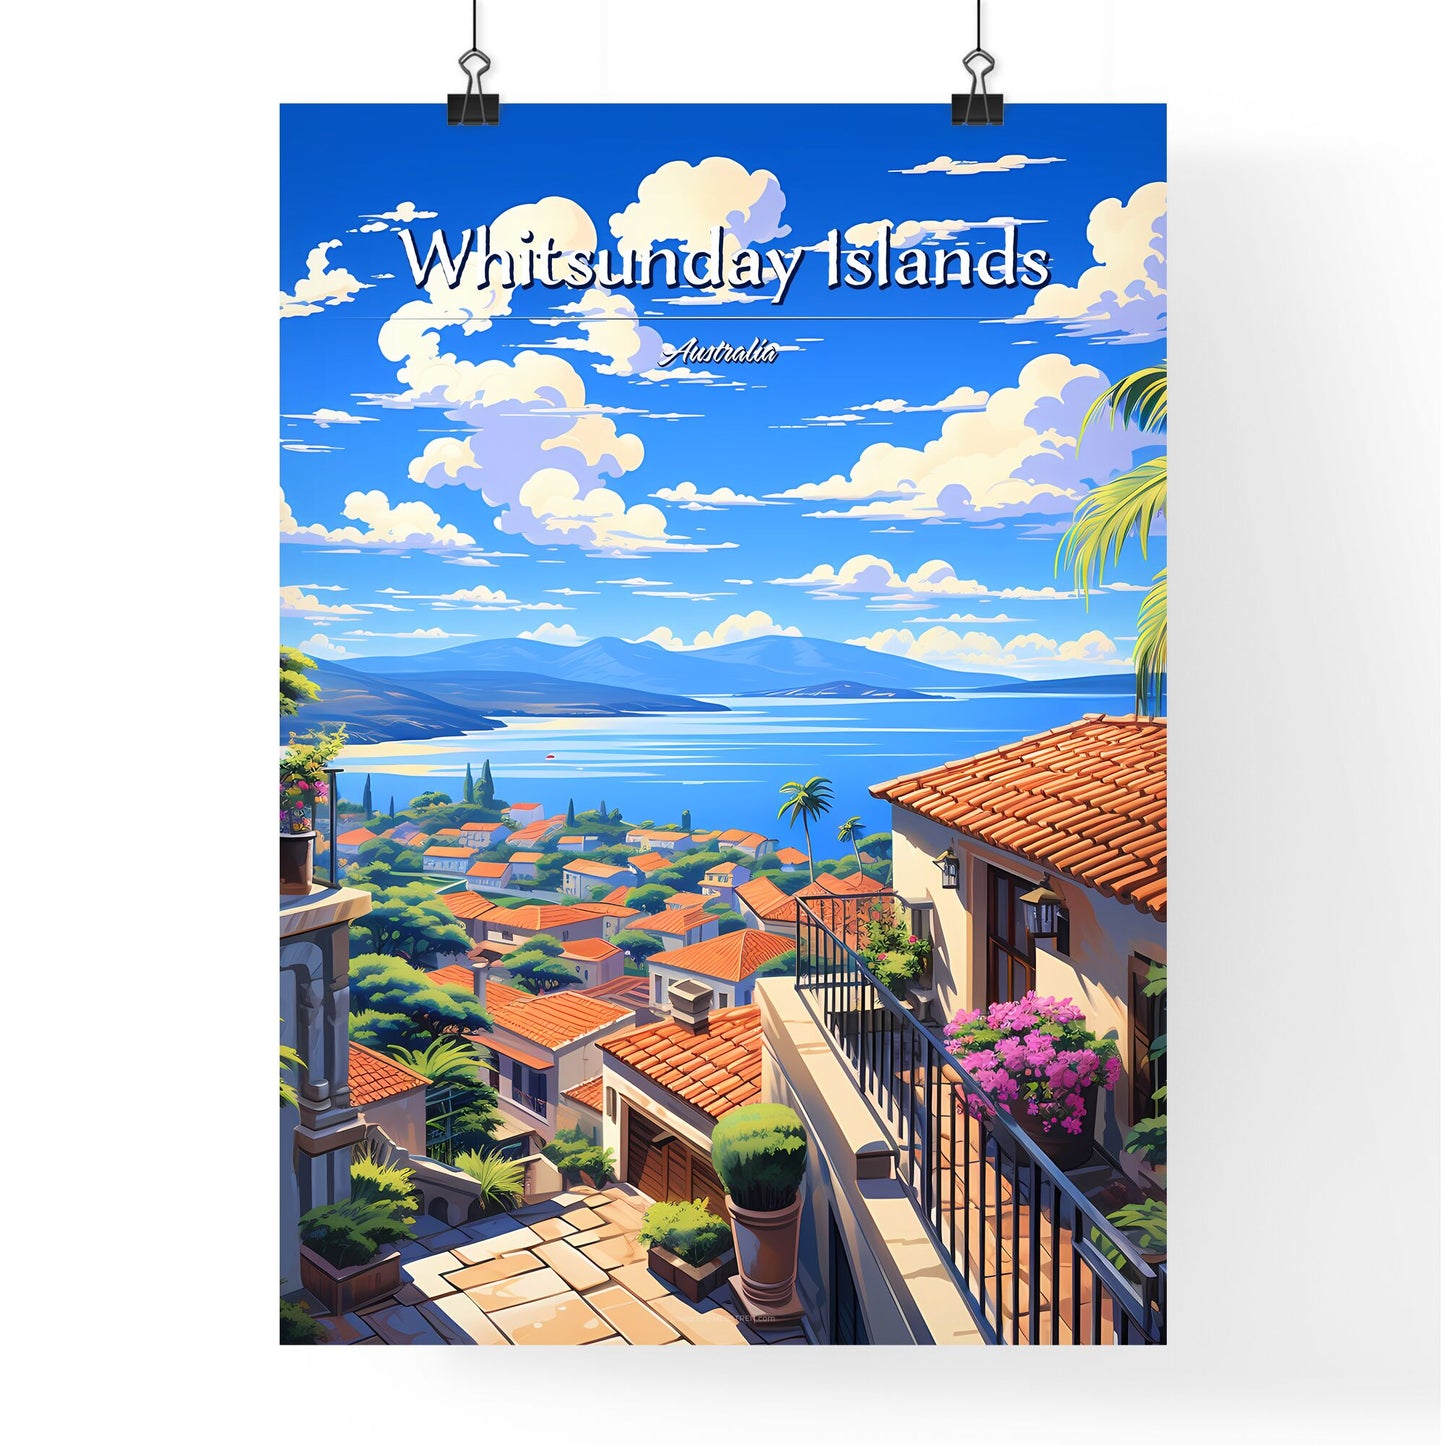 On the roofs of Whitsunday Islands, Australia - Art print of a view of a town from a hill overlooking a body of water Default Title